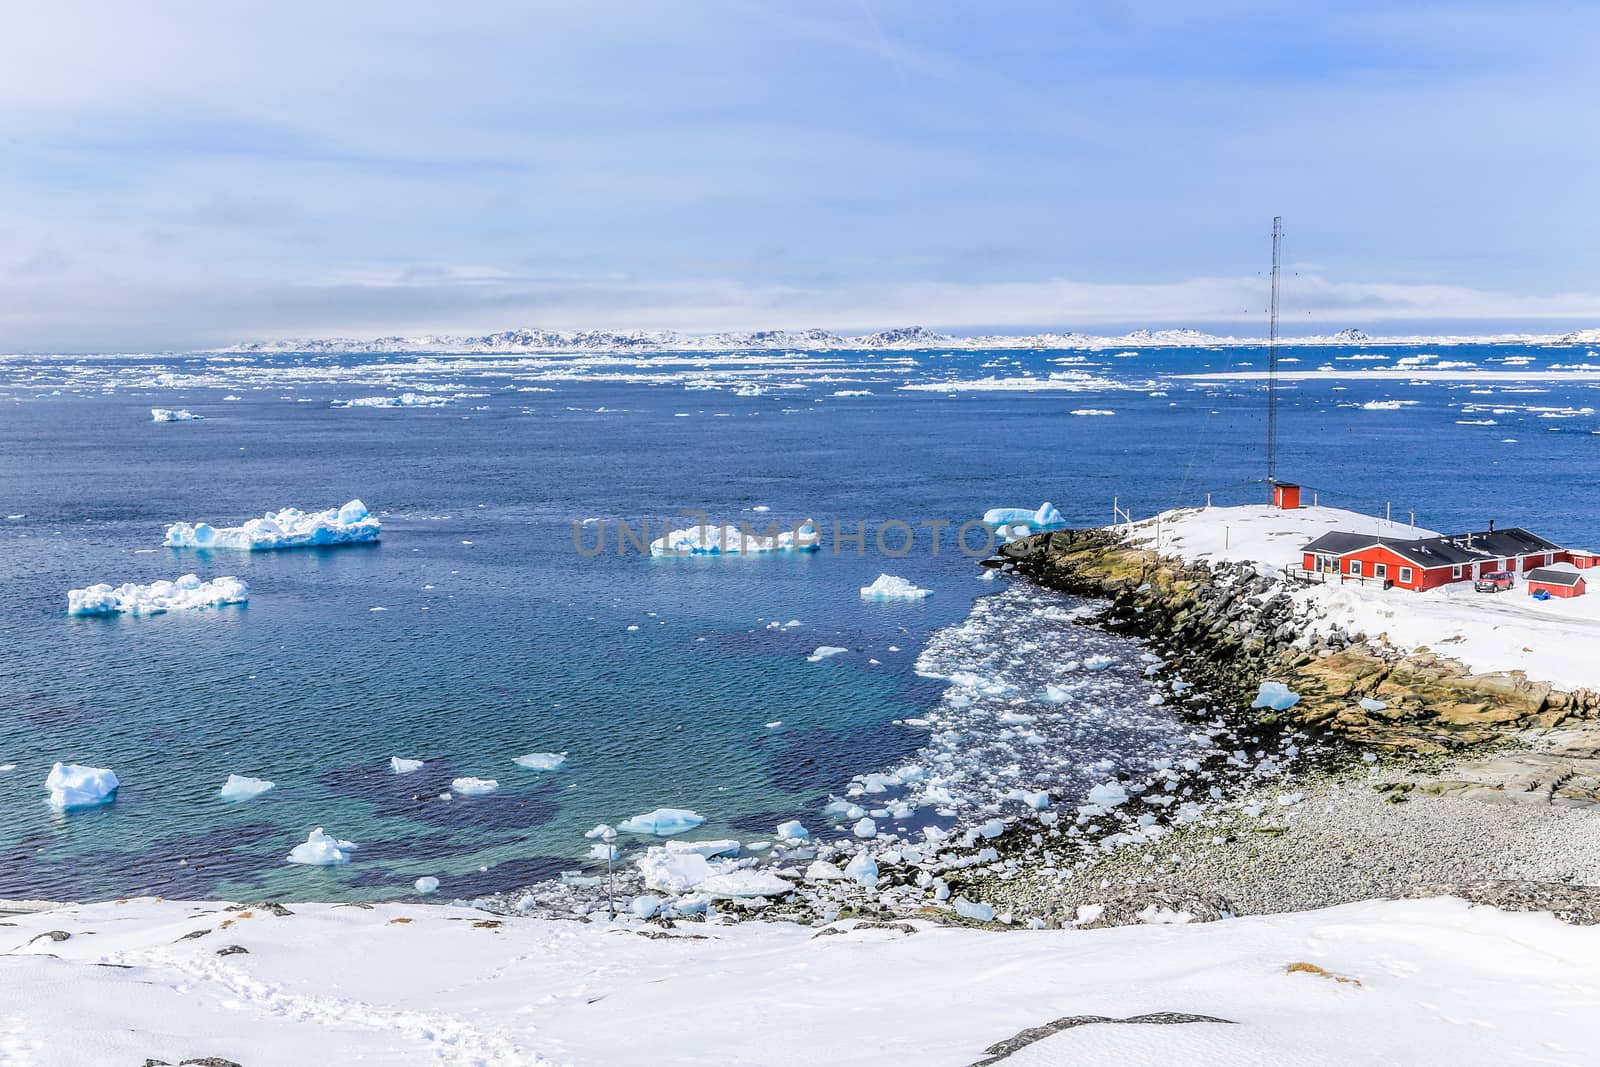 View from the old harbor to the Nuuk fjord, Greenland by ambeon